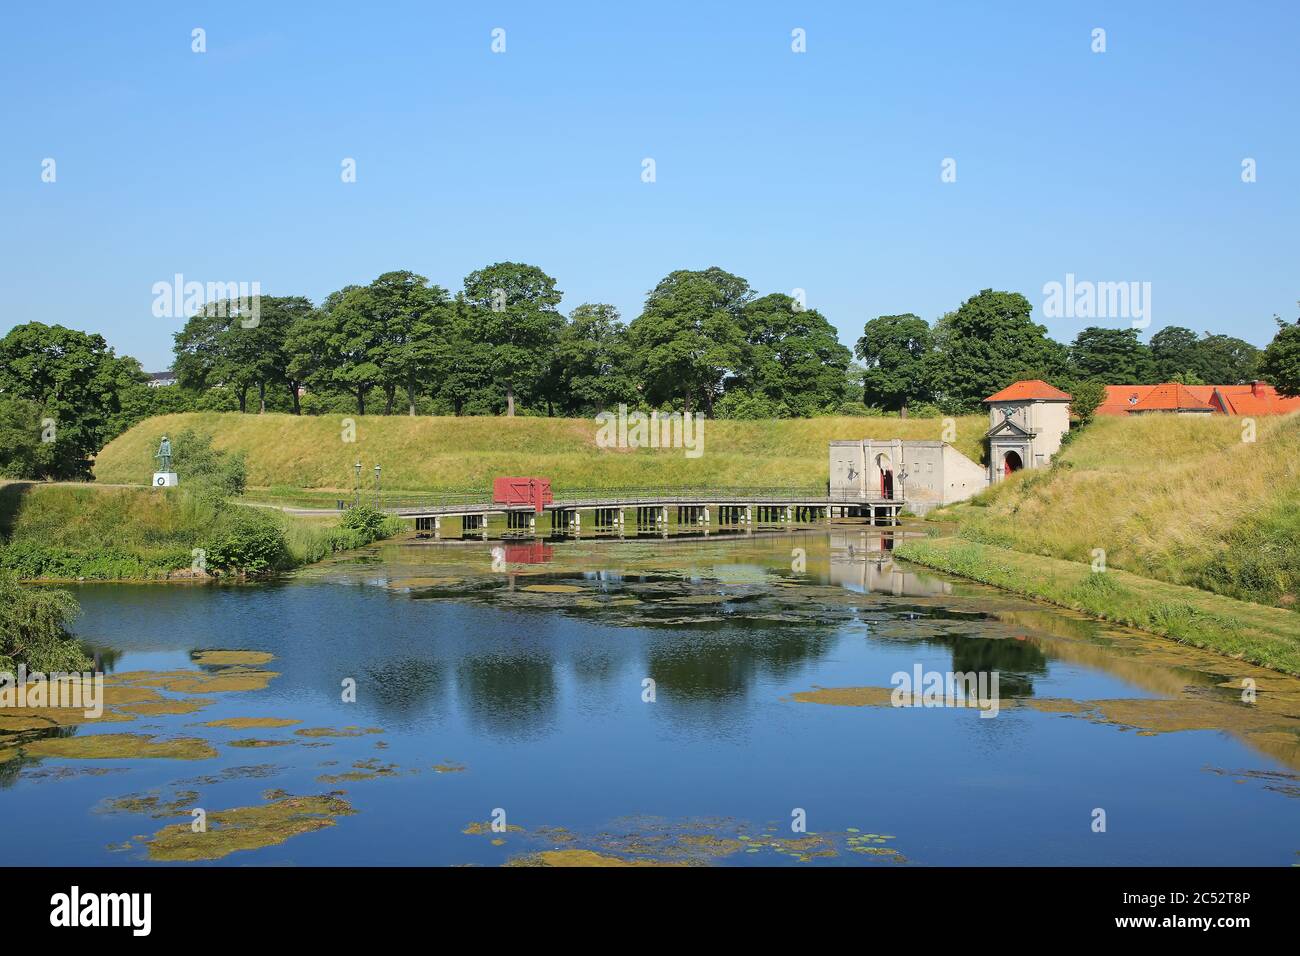 Beautiful landscape of the Kastellet, or the citadel with original city gates, moat or lake located in Christianshavn, Copenhagen, Denmark. Stock Photo